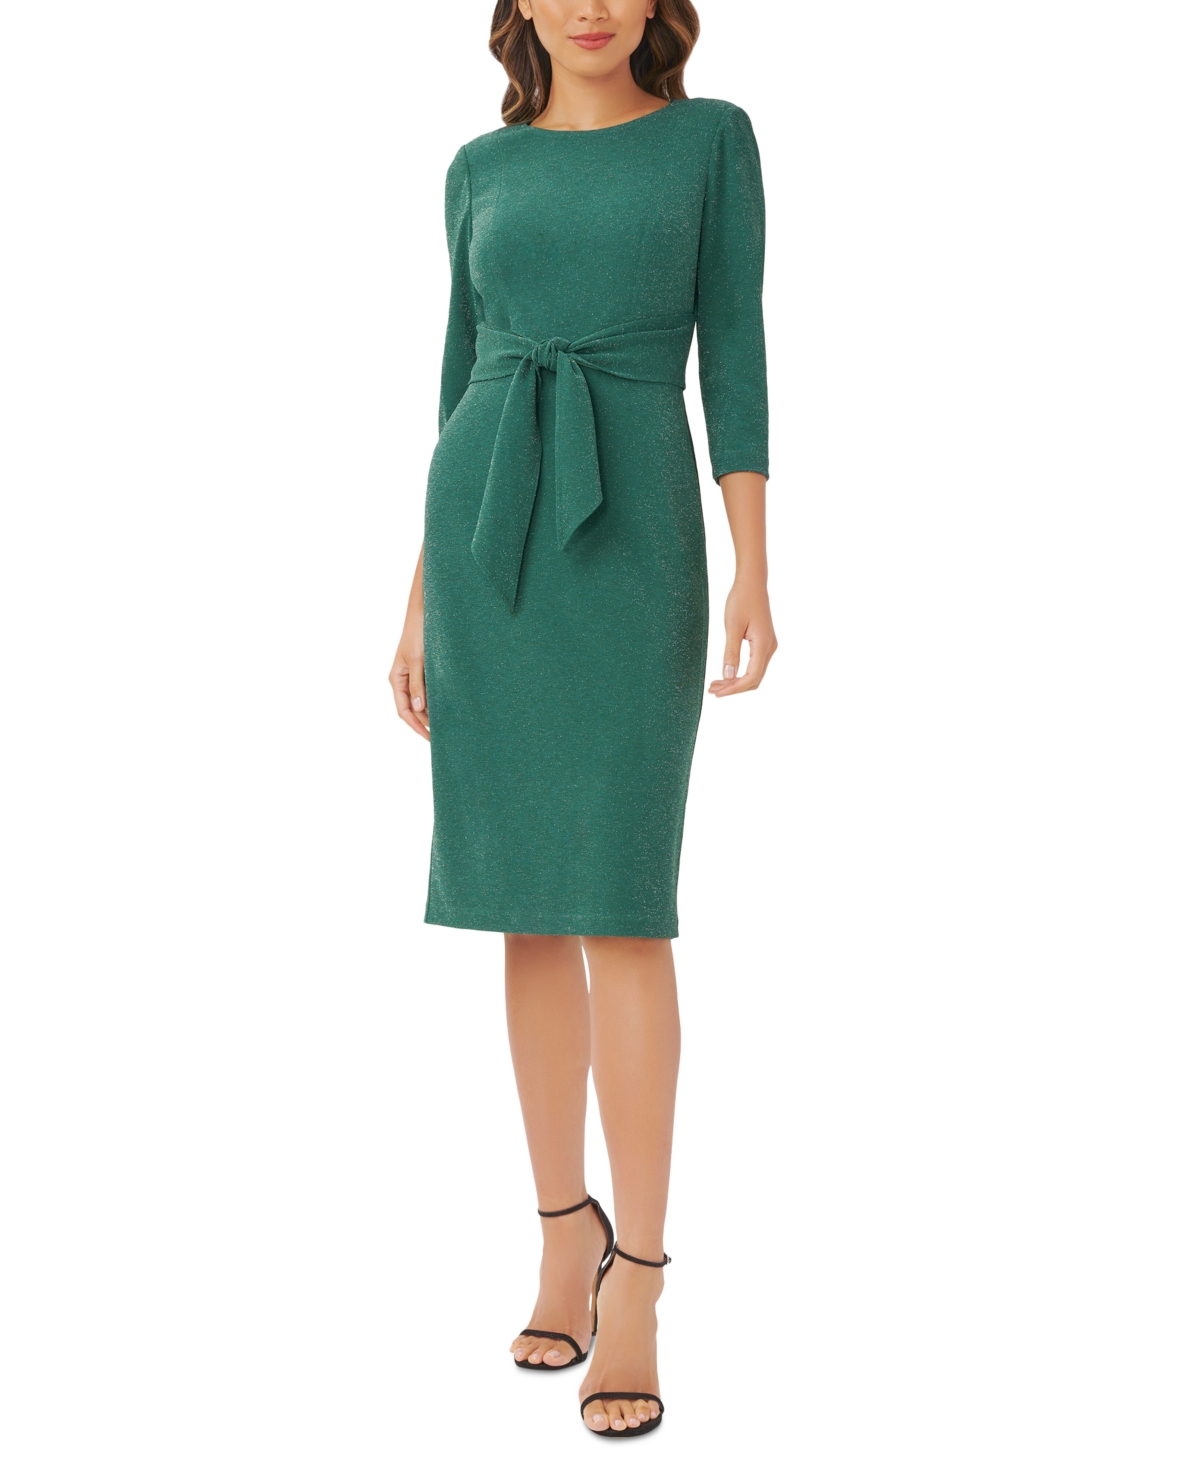 Adrianna Papell Tie-Front Sheath Dress